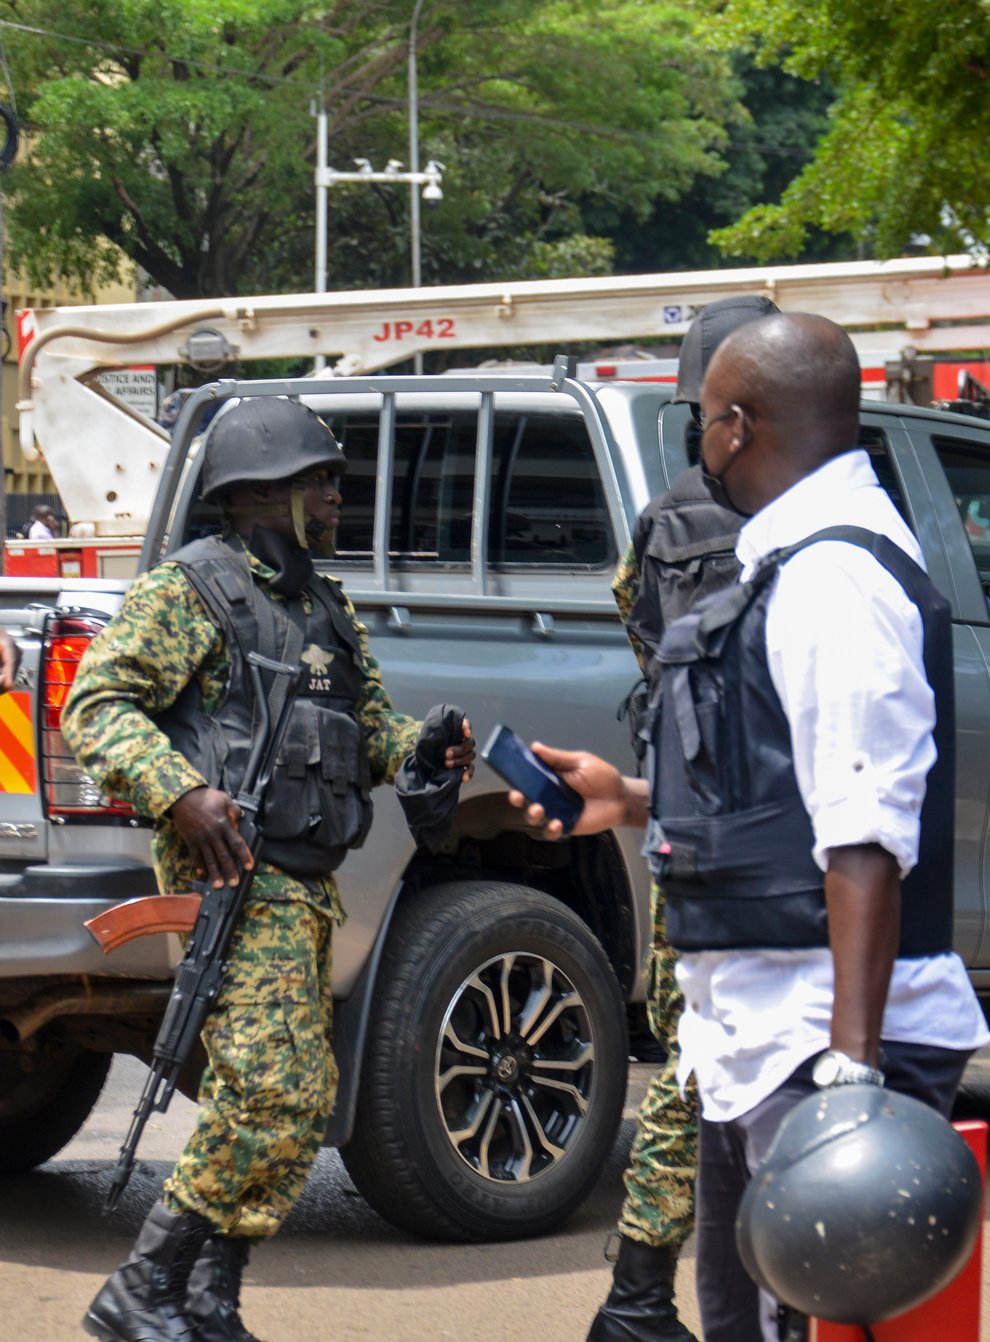 Security forces secure the scene of a blast on a street near the parliamentary building in Kampala, Uganda, Tuesday, Nov. 16, 2021. Two loud explosions rocked Uganda’s capital, Kampala, early Tuesday, sparking chaos and confusion as people fled what is widely believed to be coordinated attacks. (AP Photo/Ronald Kabuubi)